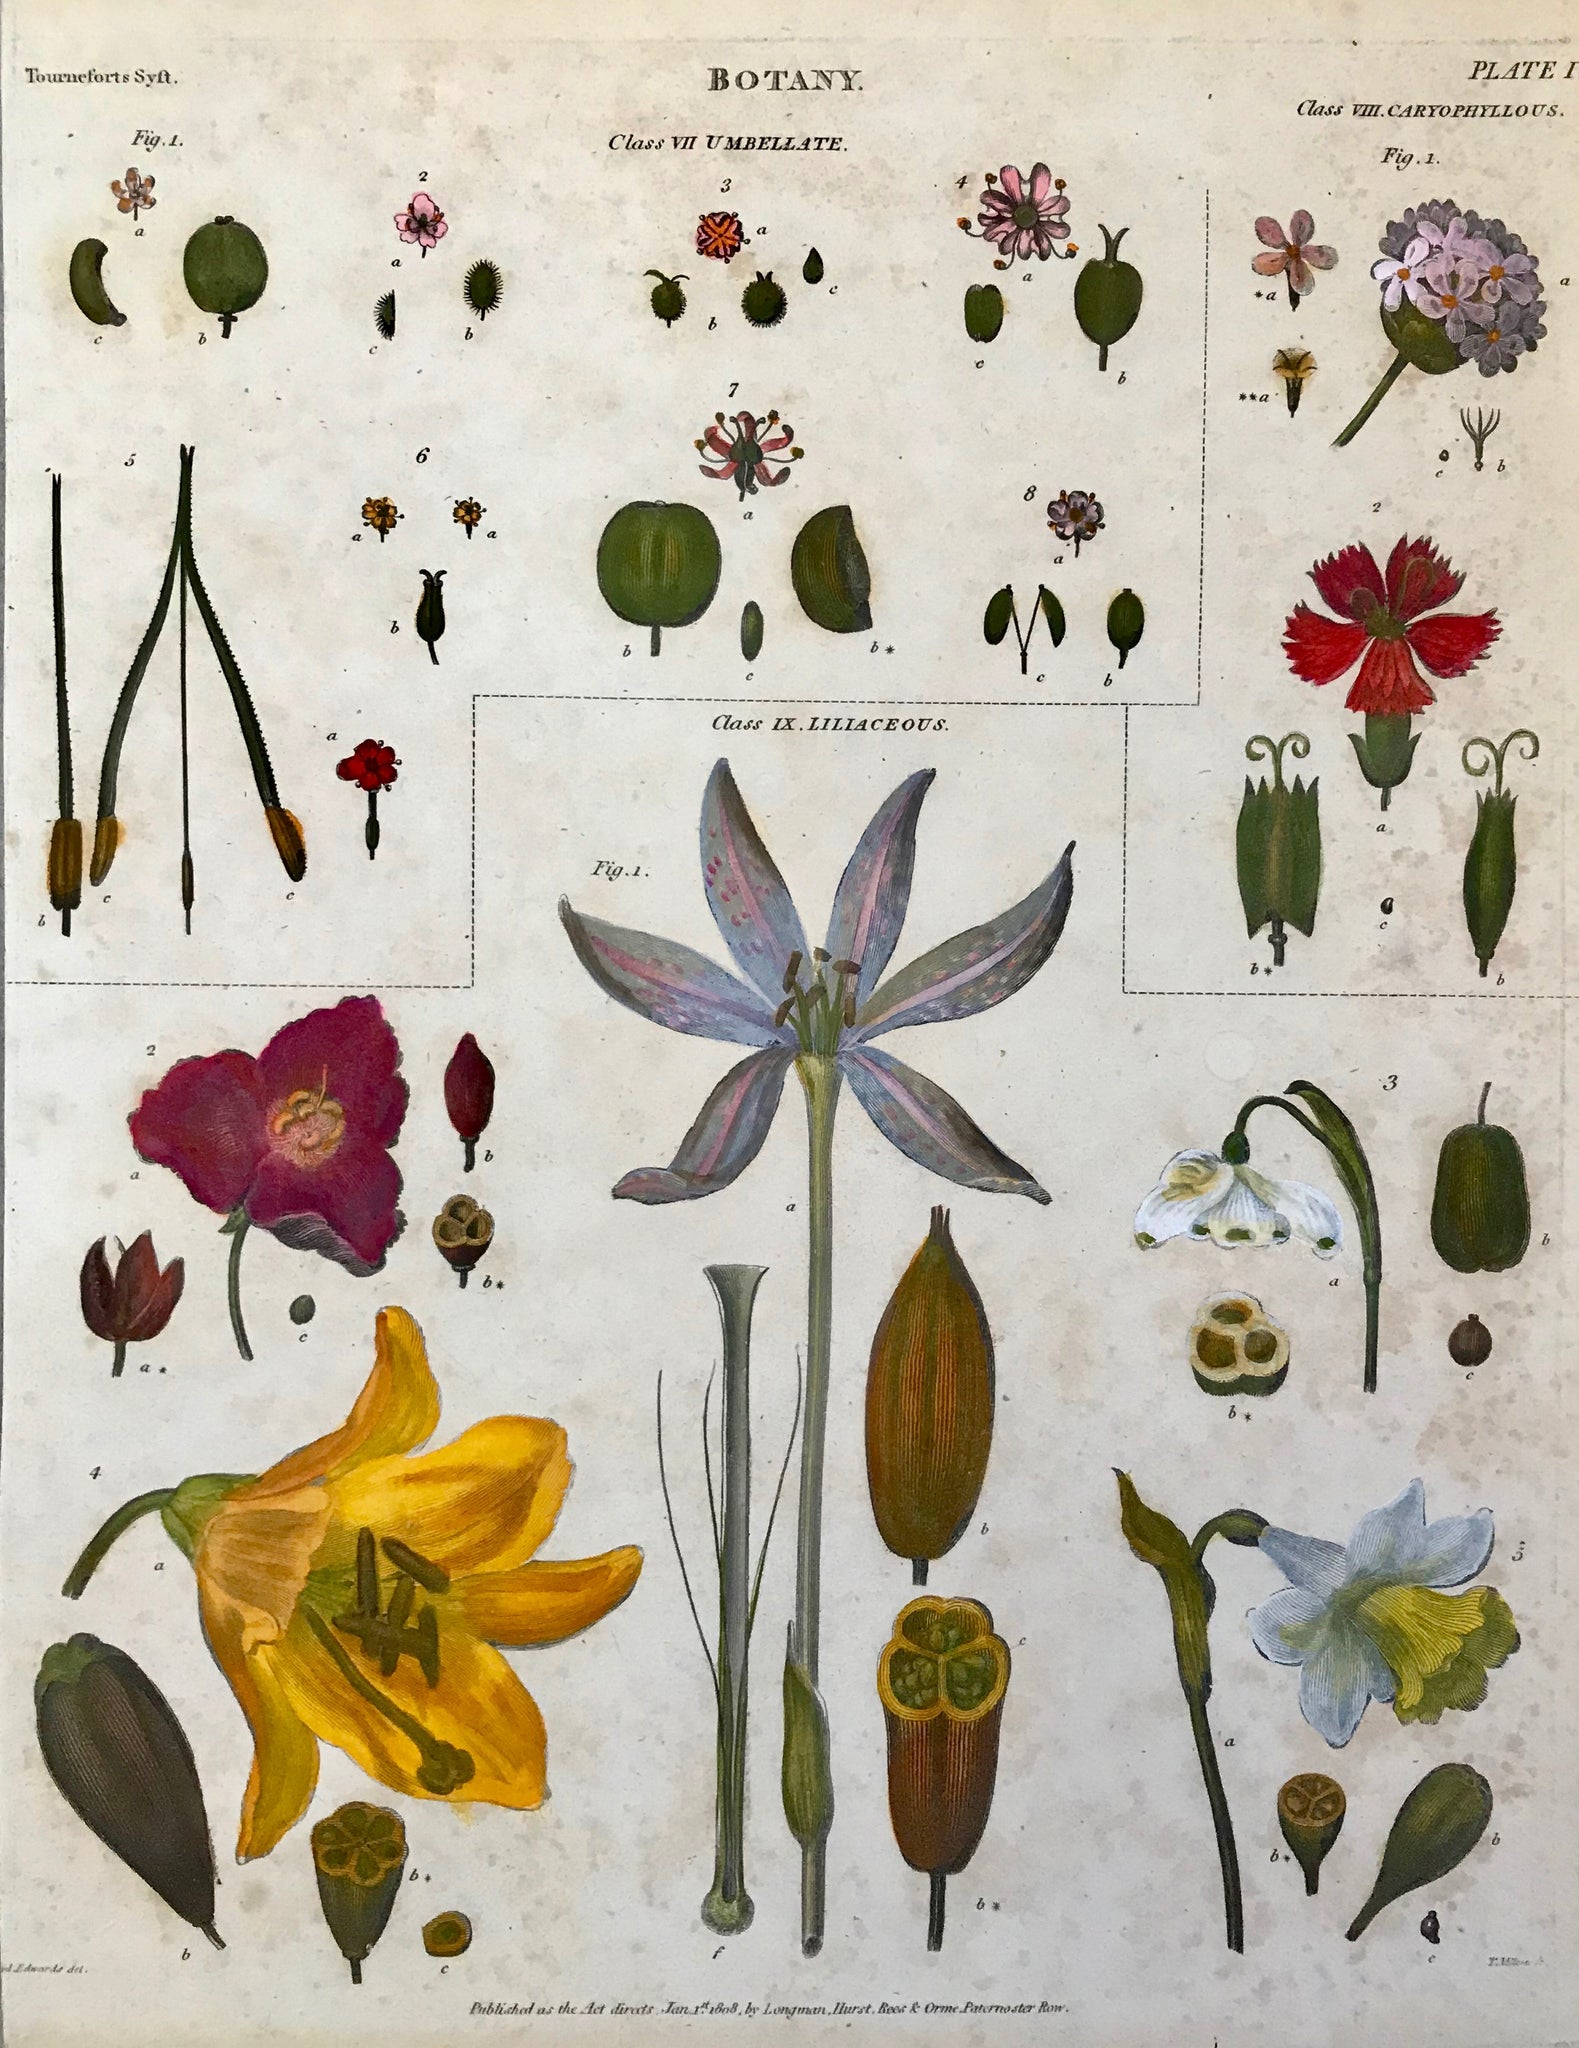 This page shows three classes of flowers: "Umbellate, Carophyllous", and "Liliaceous".  Bits and pieces of "Botany"  The individual parts of flowers and plants strewn loosely over a page in a very decorative manner.  Copperplate etchings in very attractive recent hand coloring.  Most were drawn by Syd Edwards.